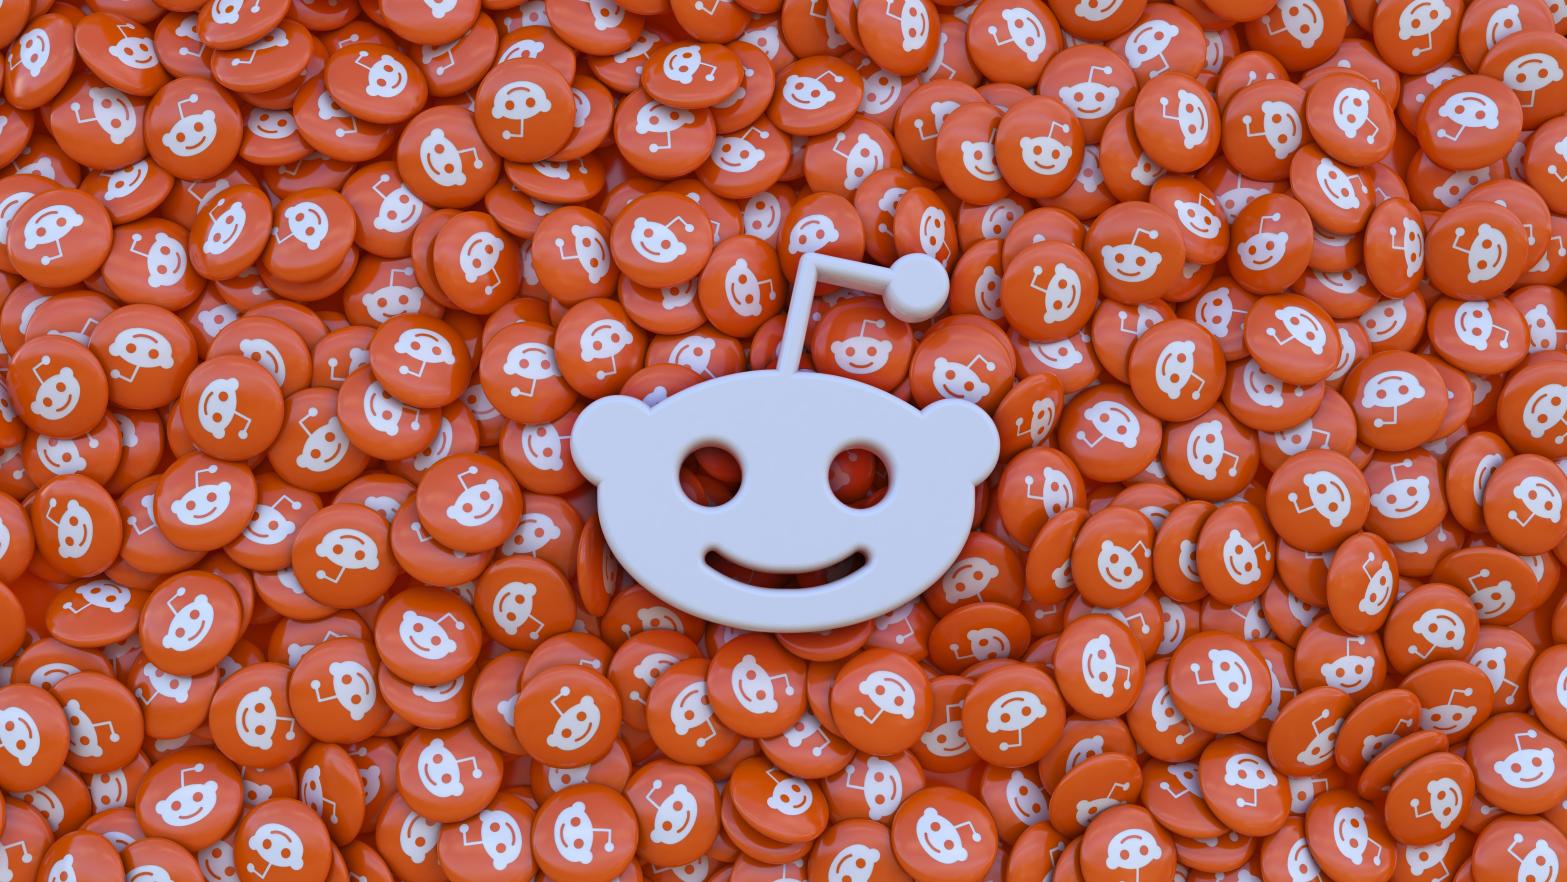 While many of the biggest subreddits have again reopened, many with more than 1 million subscribers remain private, are restricted, or are protesting API changes with pictures of John Oliver. (Image: Marcelo Mollaretti, Shutterstock)